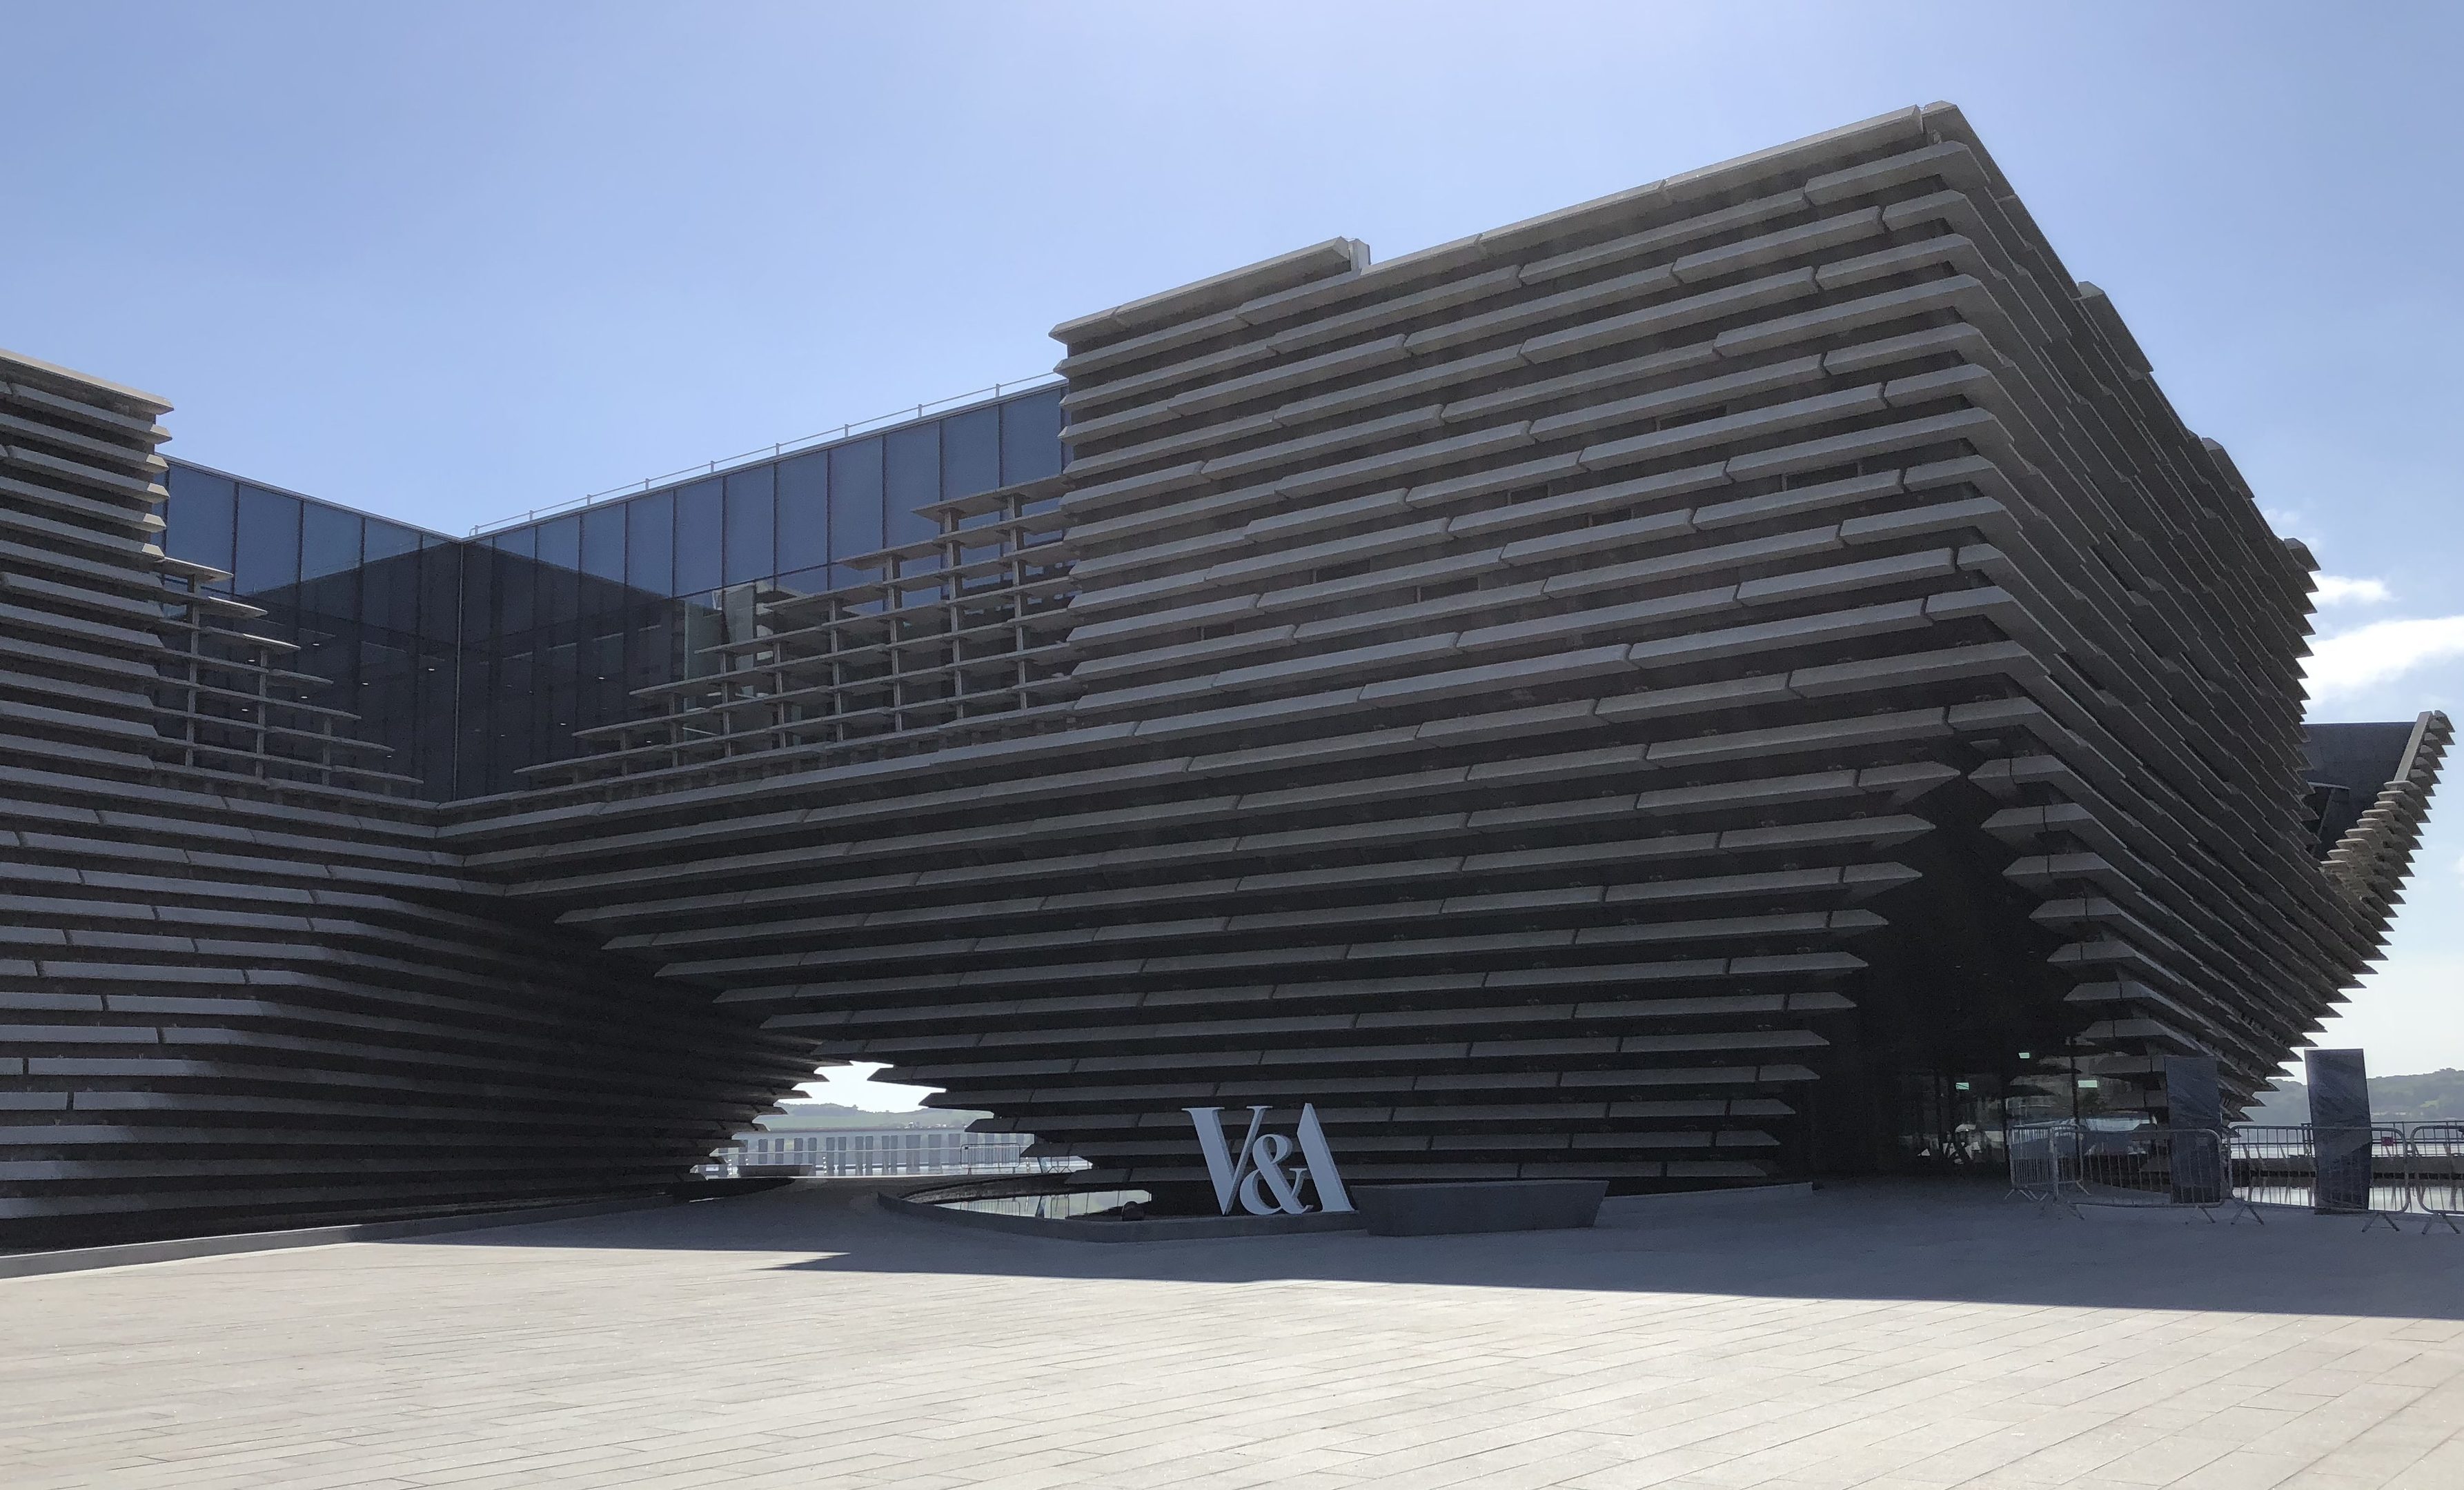 Dundee's V&A Museum